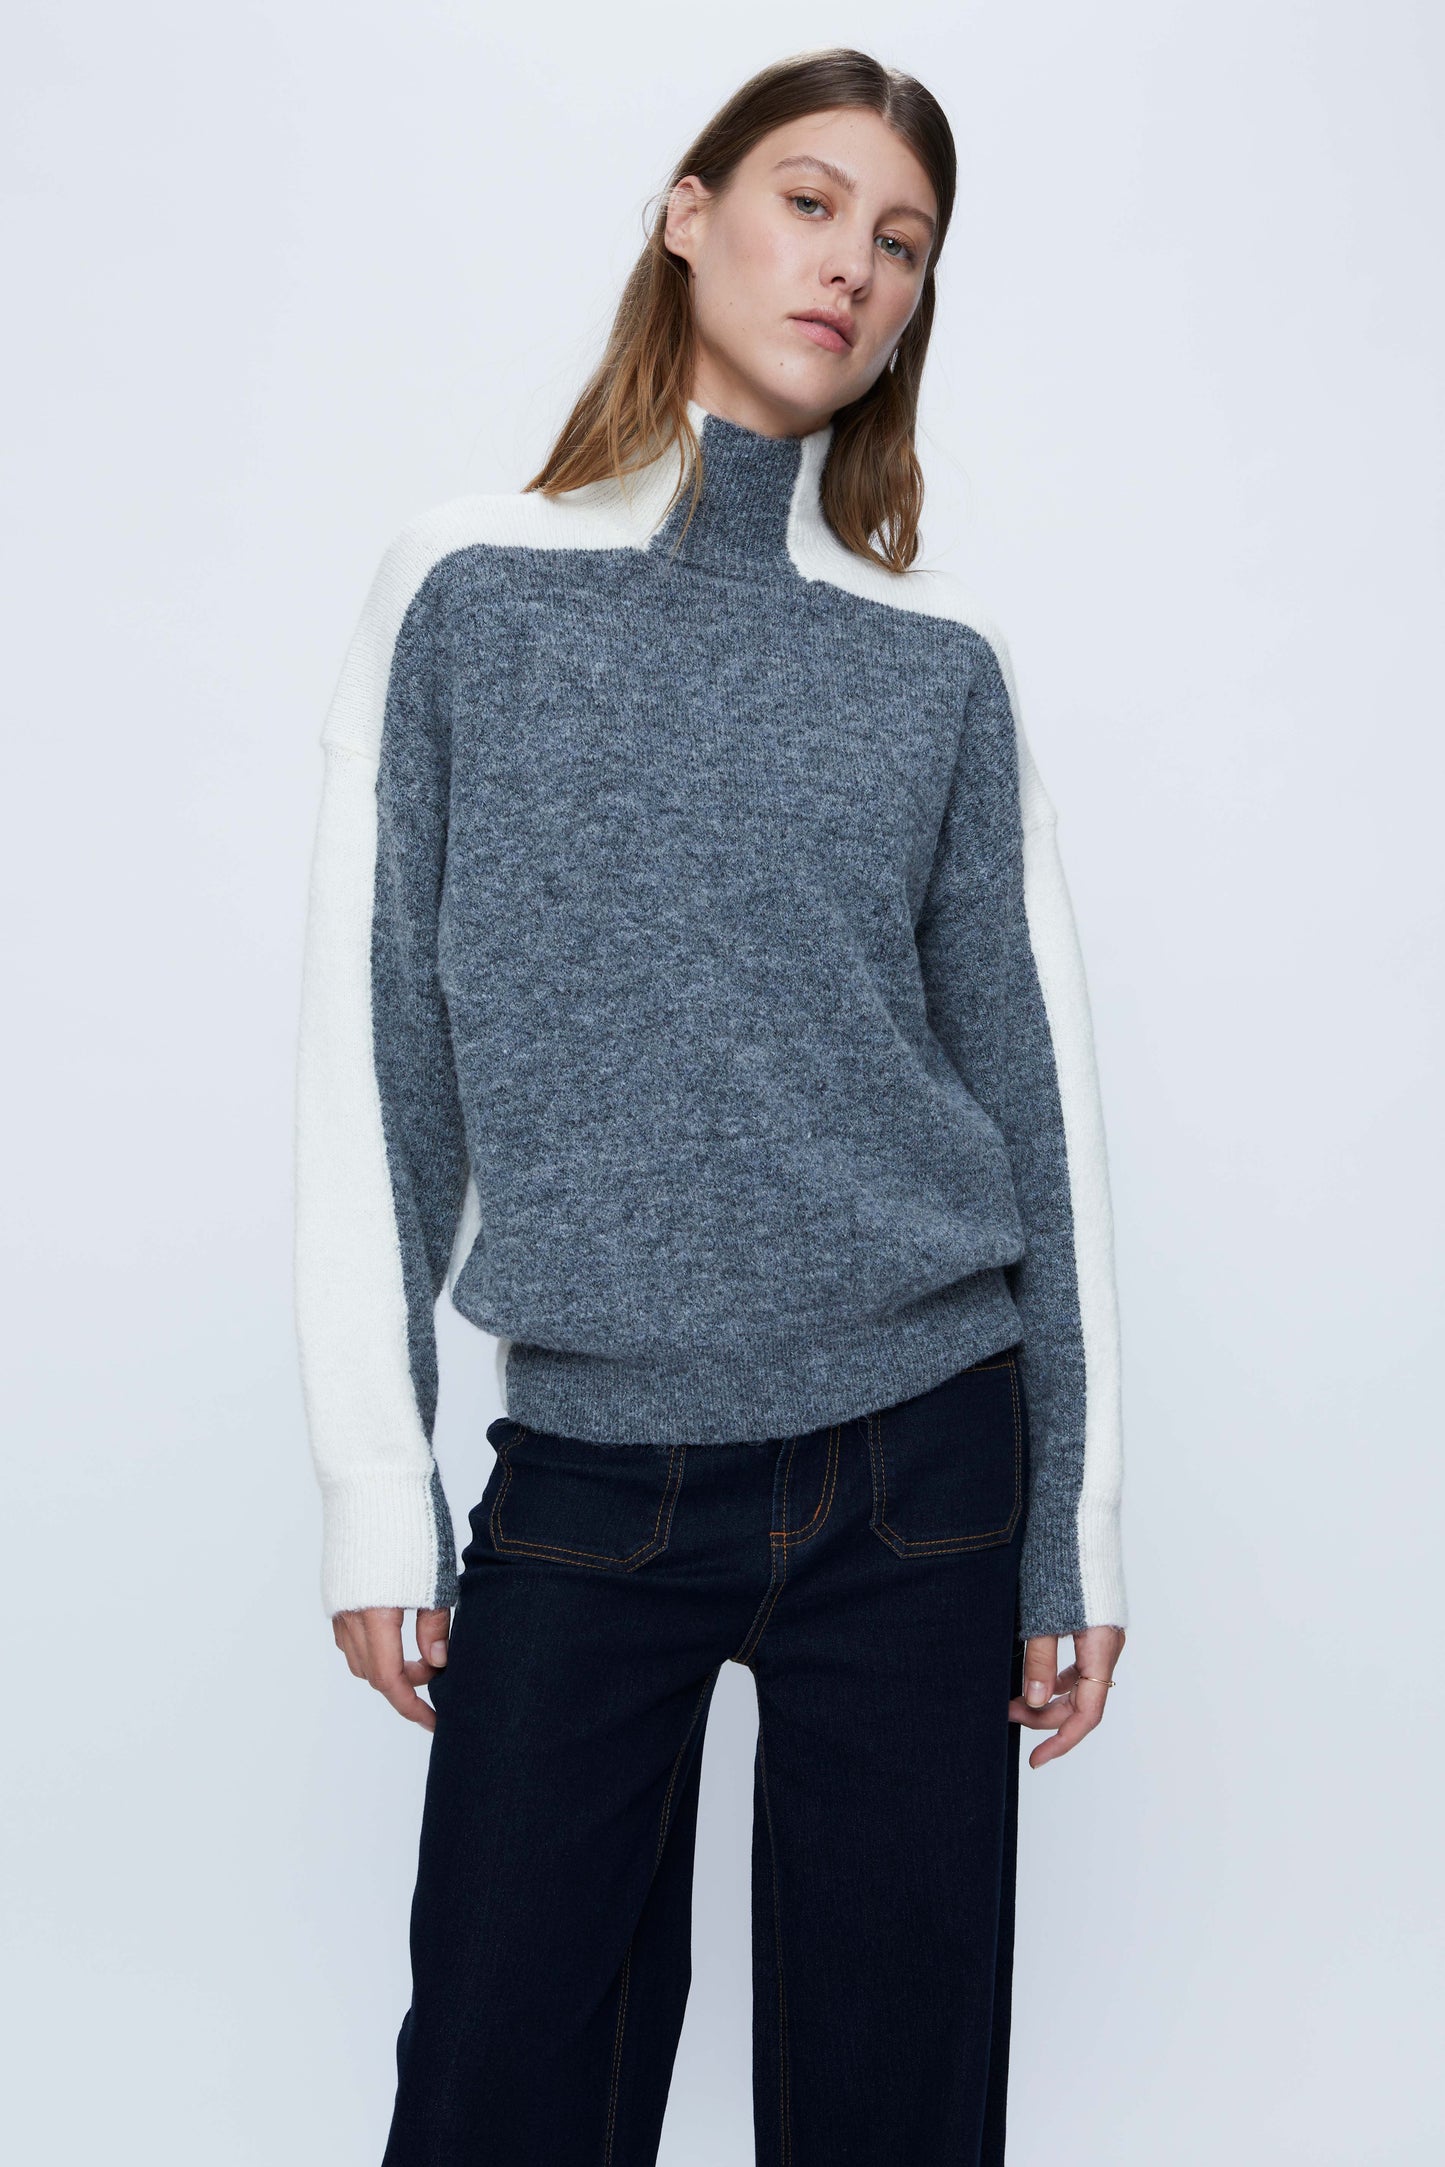 Gray two-tone turtleneck knit sweater